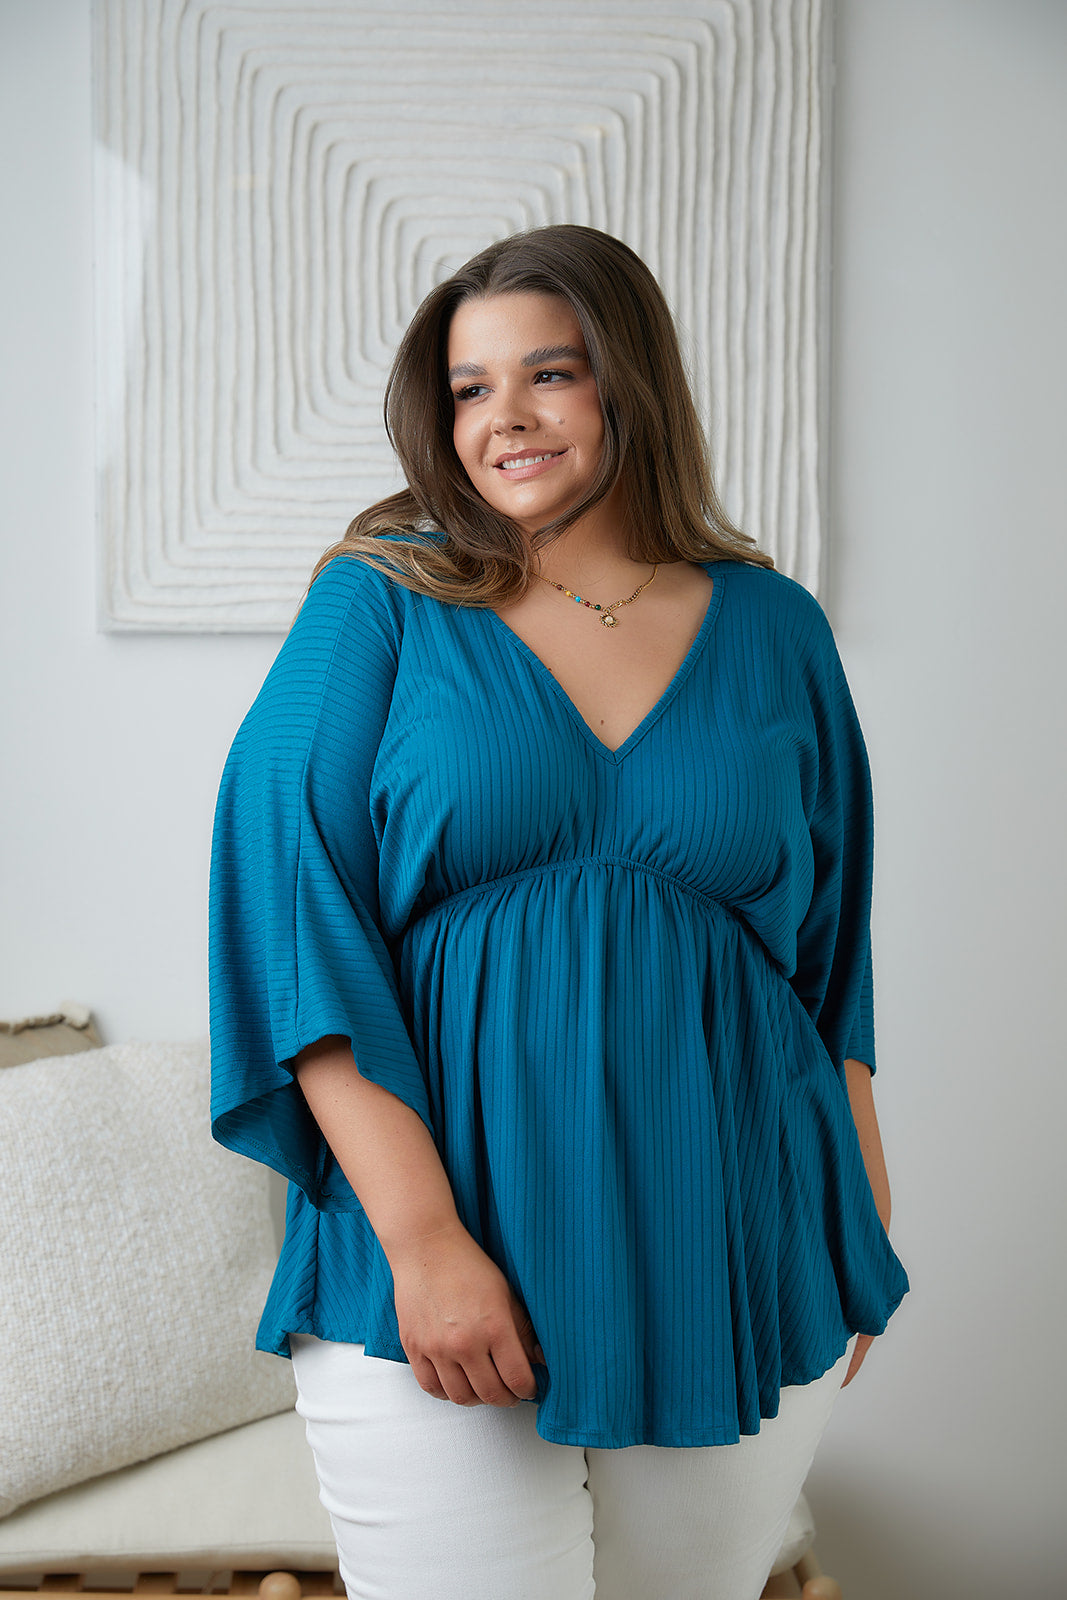 Storied Moments Draped Peplum Top in Teal (Ships in 1-2 Weeks)